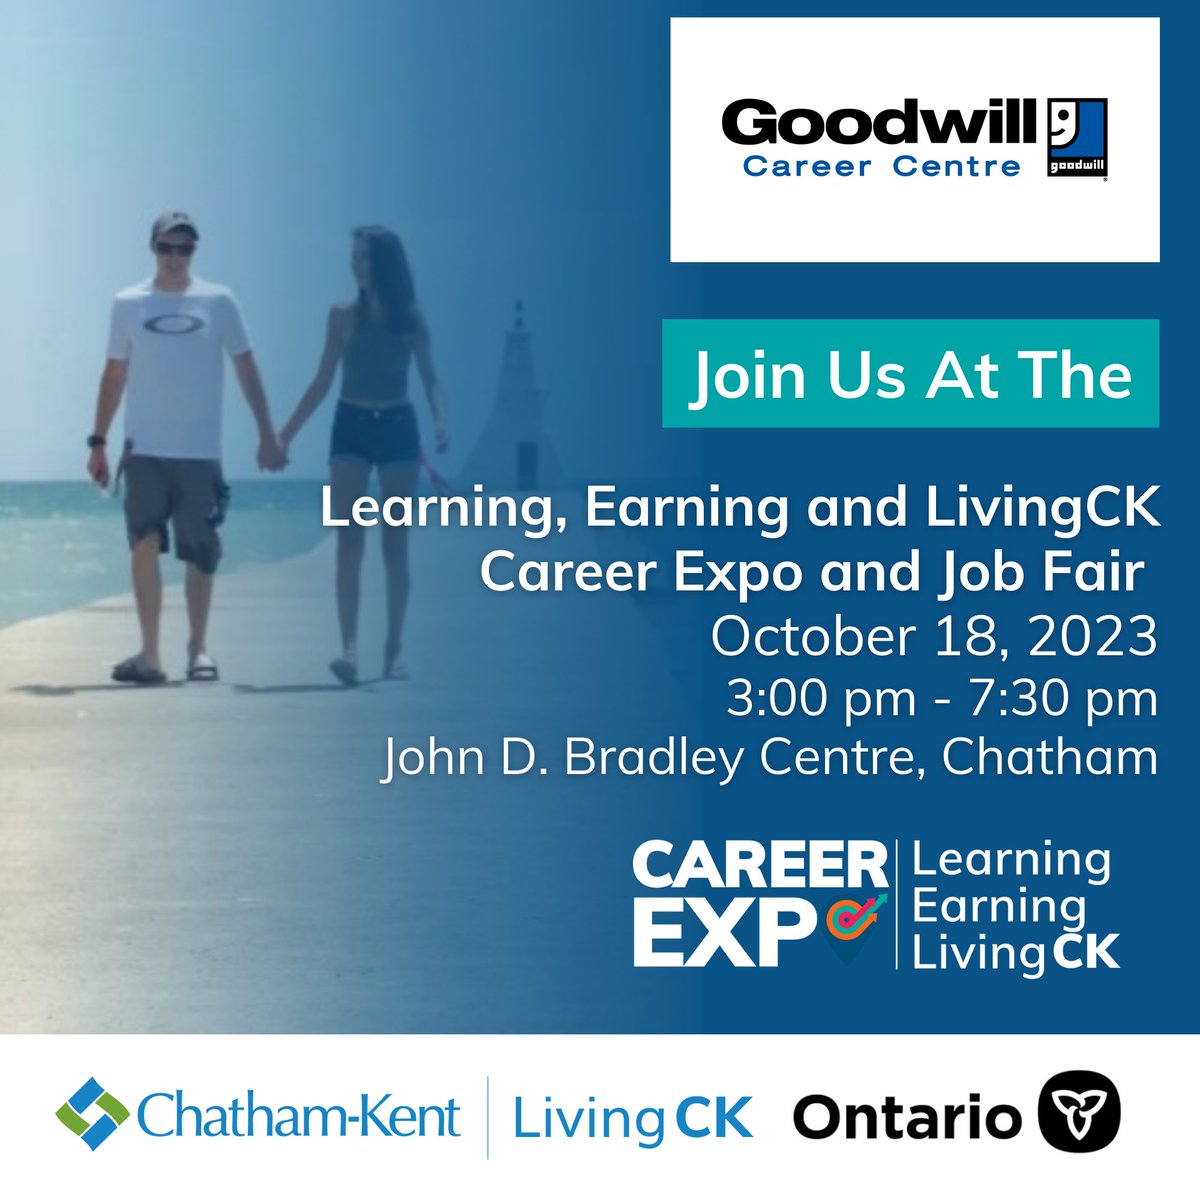 The Learning, Earning and LivingCK Career Expo and Job Fair is almost here! Parent, students, and jobseekers stop by our booth and learn about career pathways, programs, services and employment opportunities at the Goodwill Career Centre.
Learn more at LivingCK.ca/CareerExpo